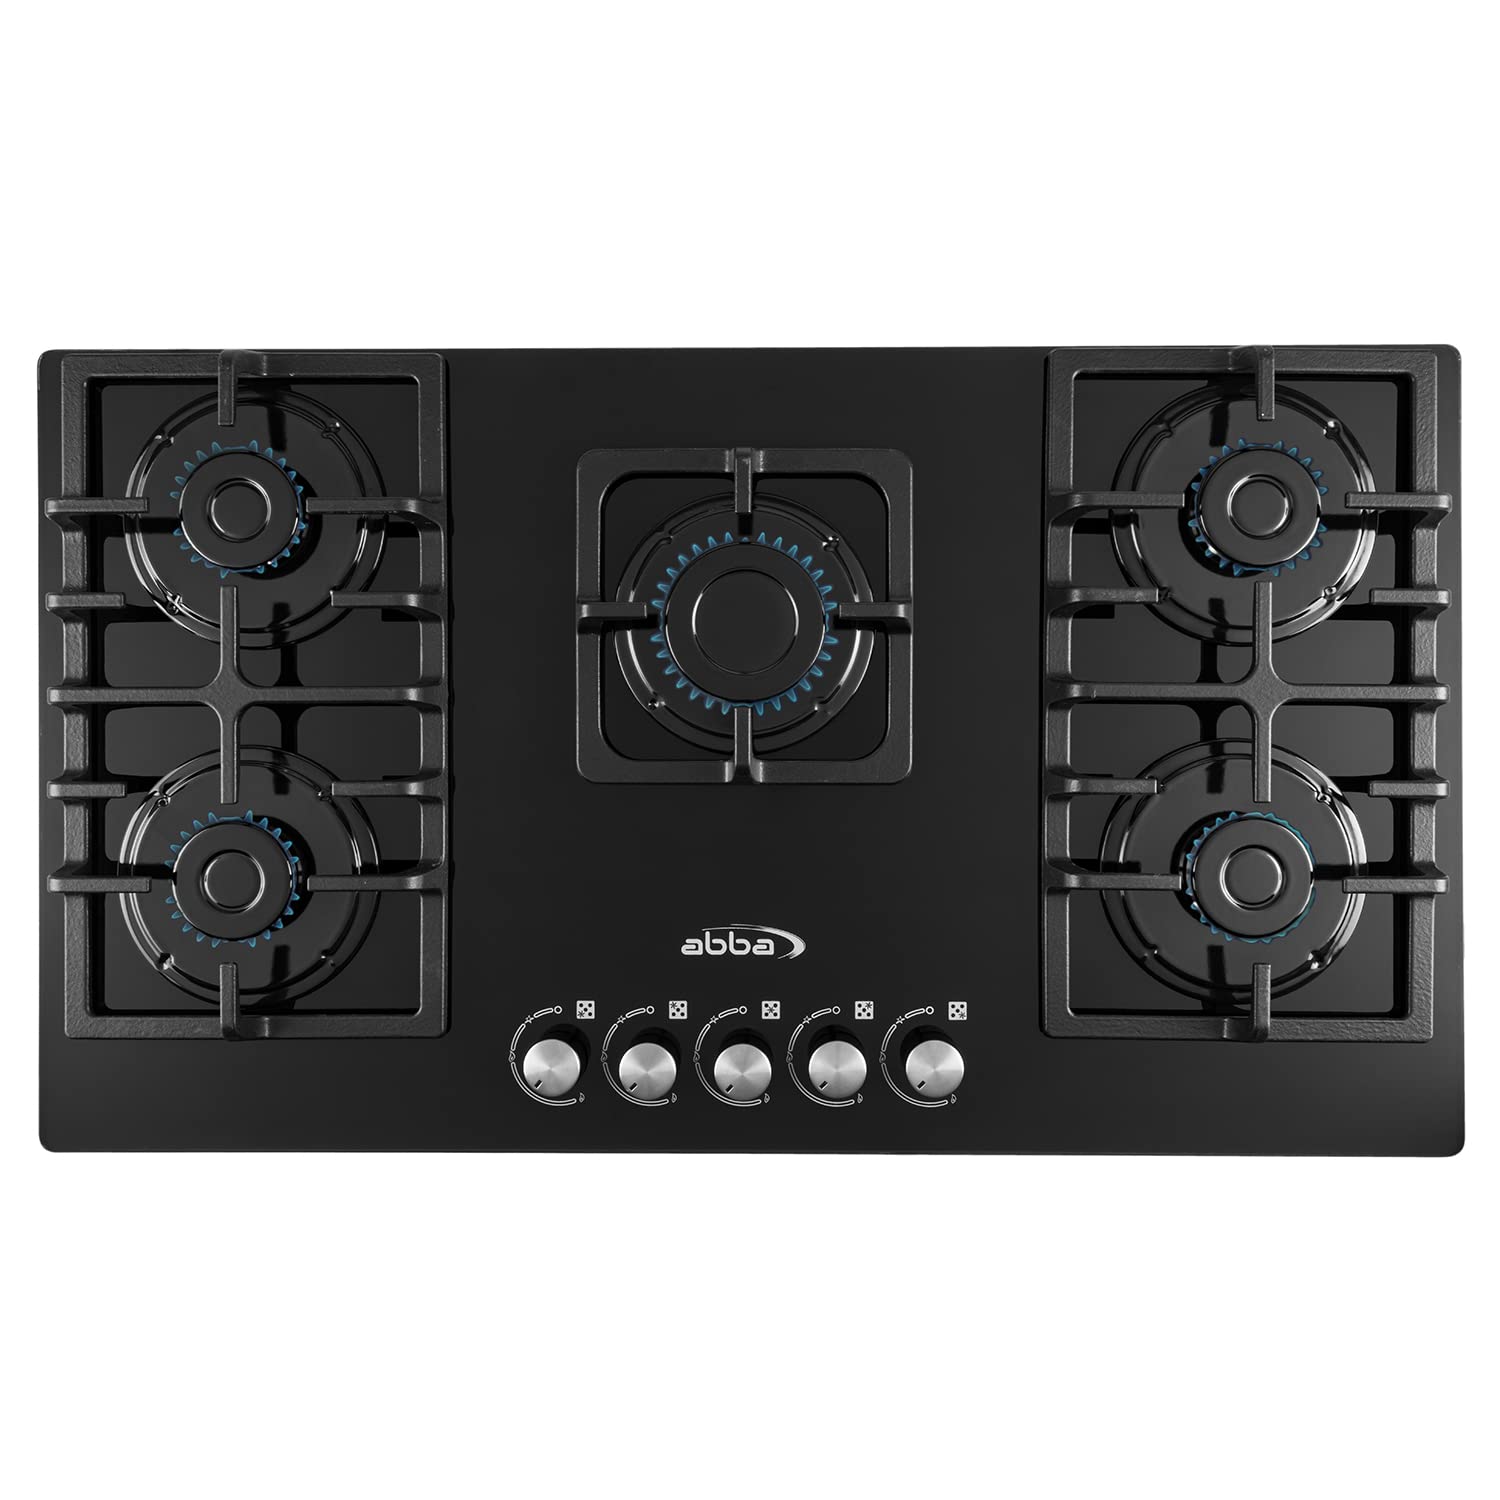 ABBA 36" Gas Cooktop with 5 Sealed Burners - Tempered Glass Surface with SABAF Burners, Natural Gas Stove for Countertop, Home Improvement Essentials, Easy to Clean, 36" x 4.1" x 20.5"